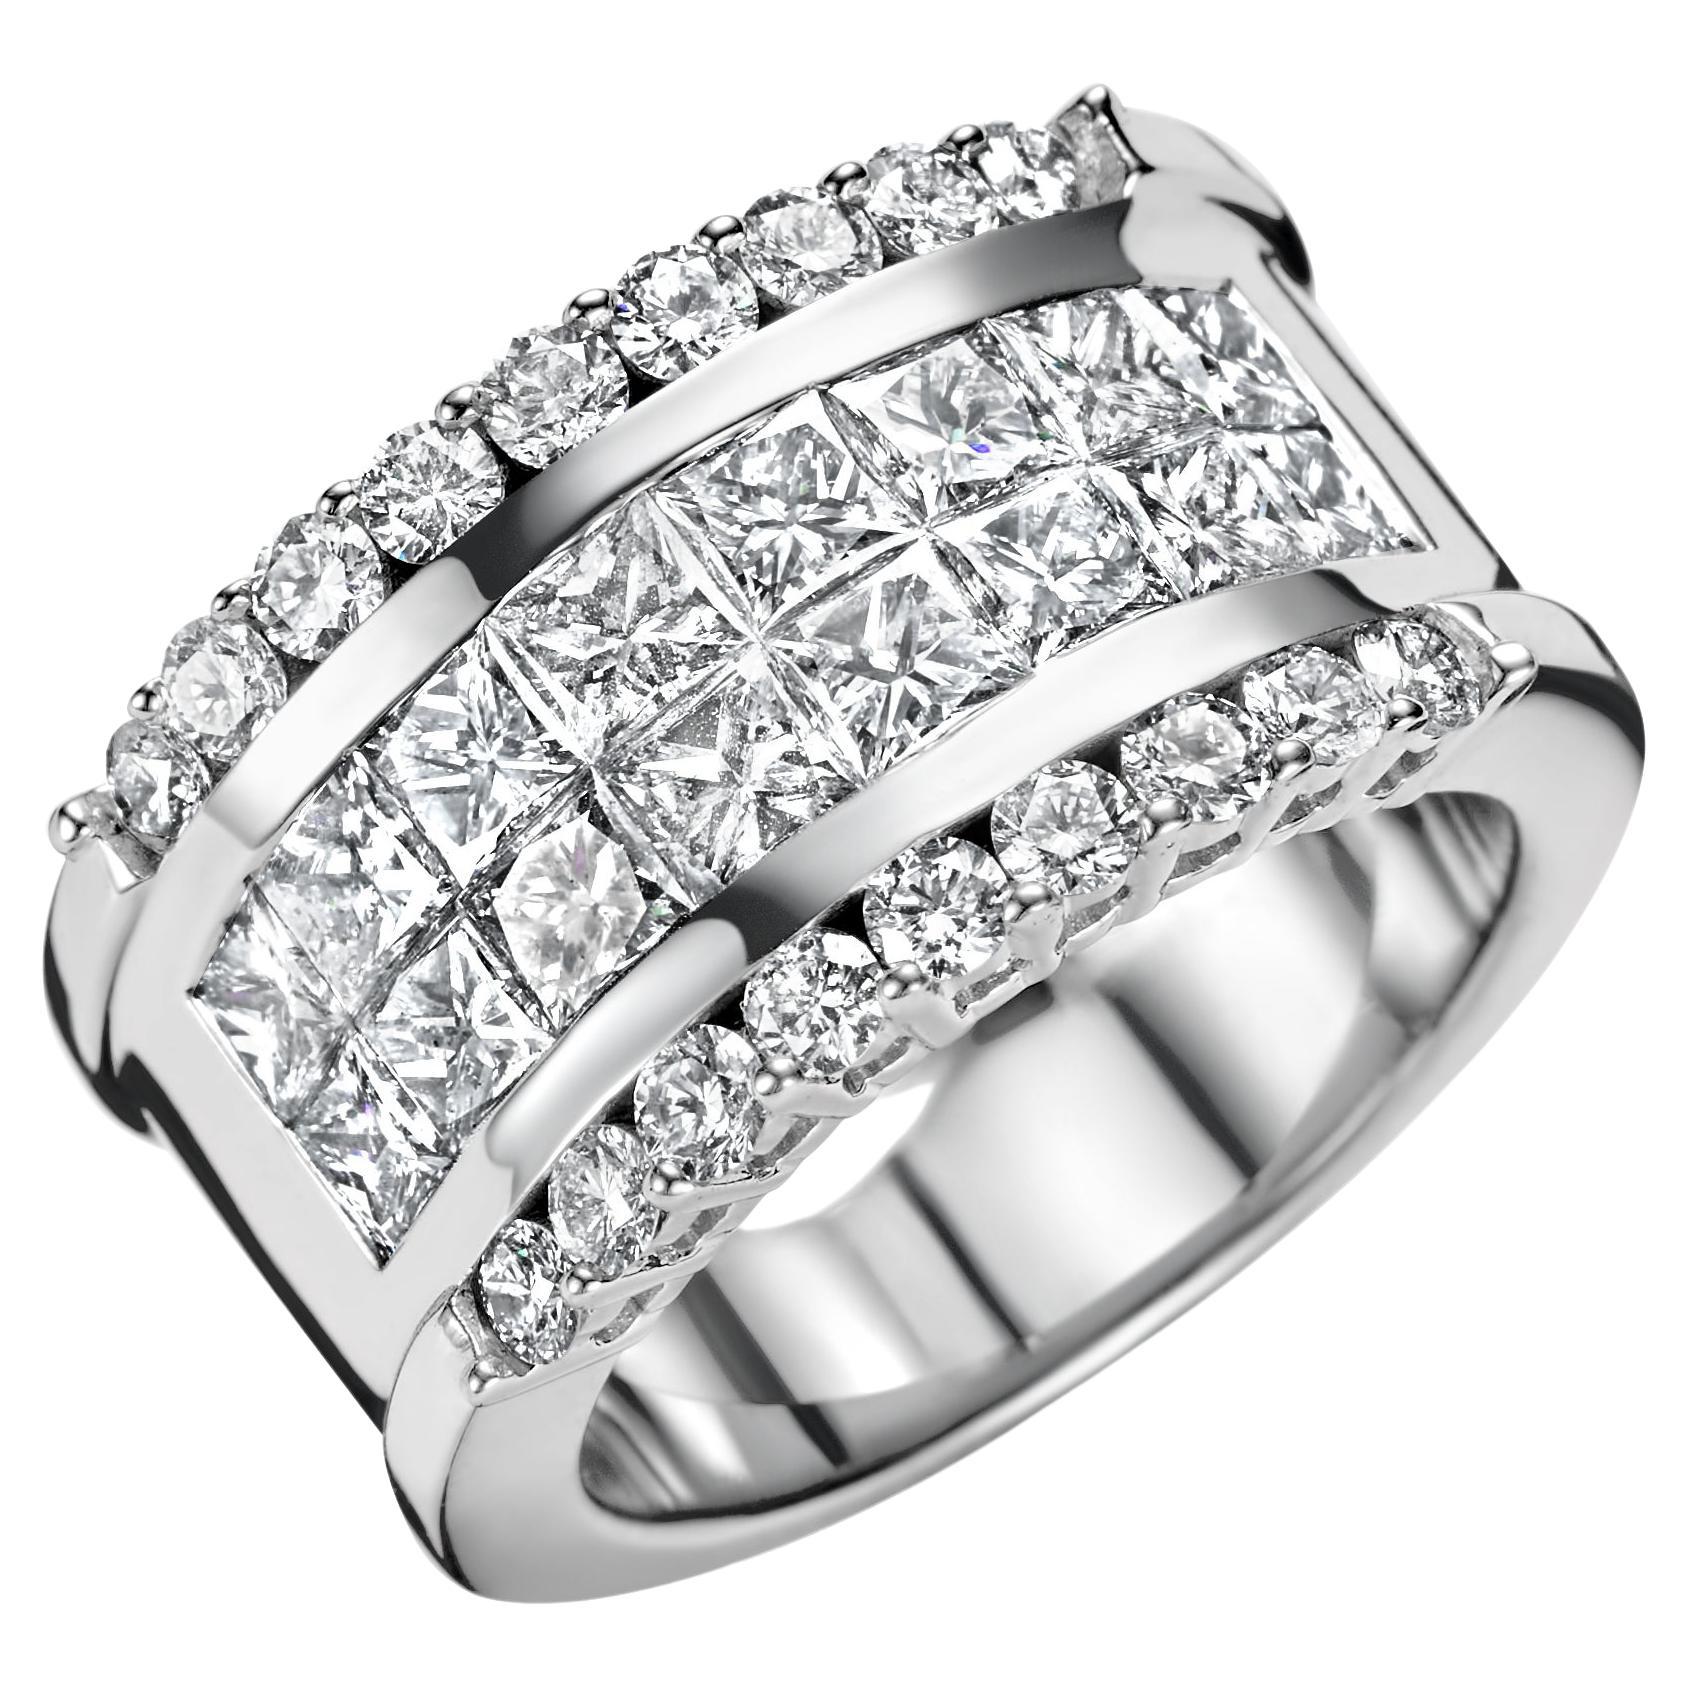 18kt White Gold Ring With 2.5 ct Princess cut & 1 ct Brilliant cut Diamond For Sale